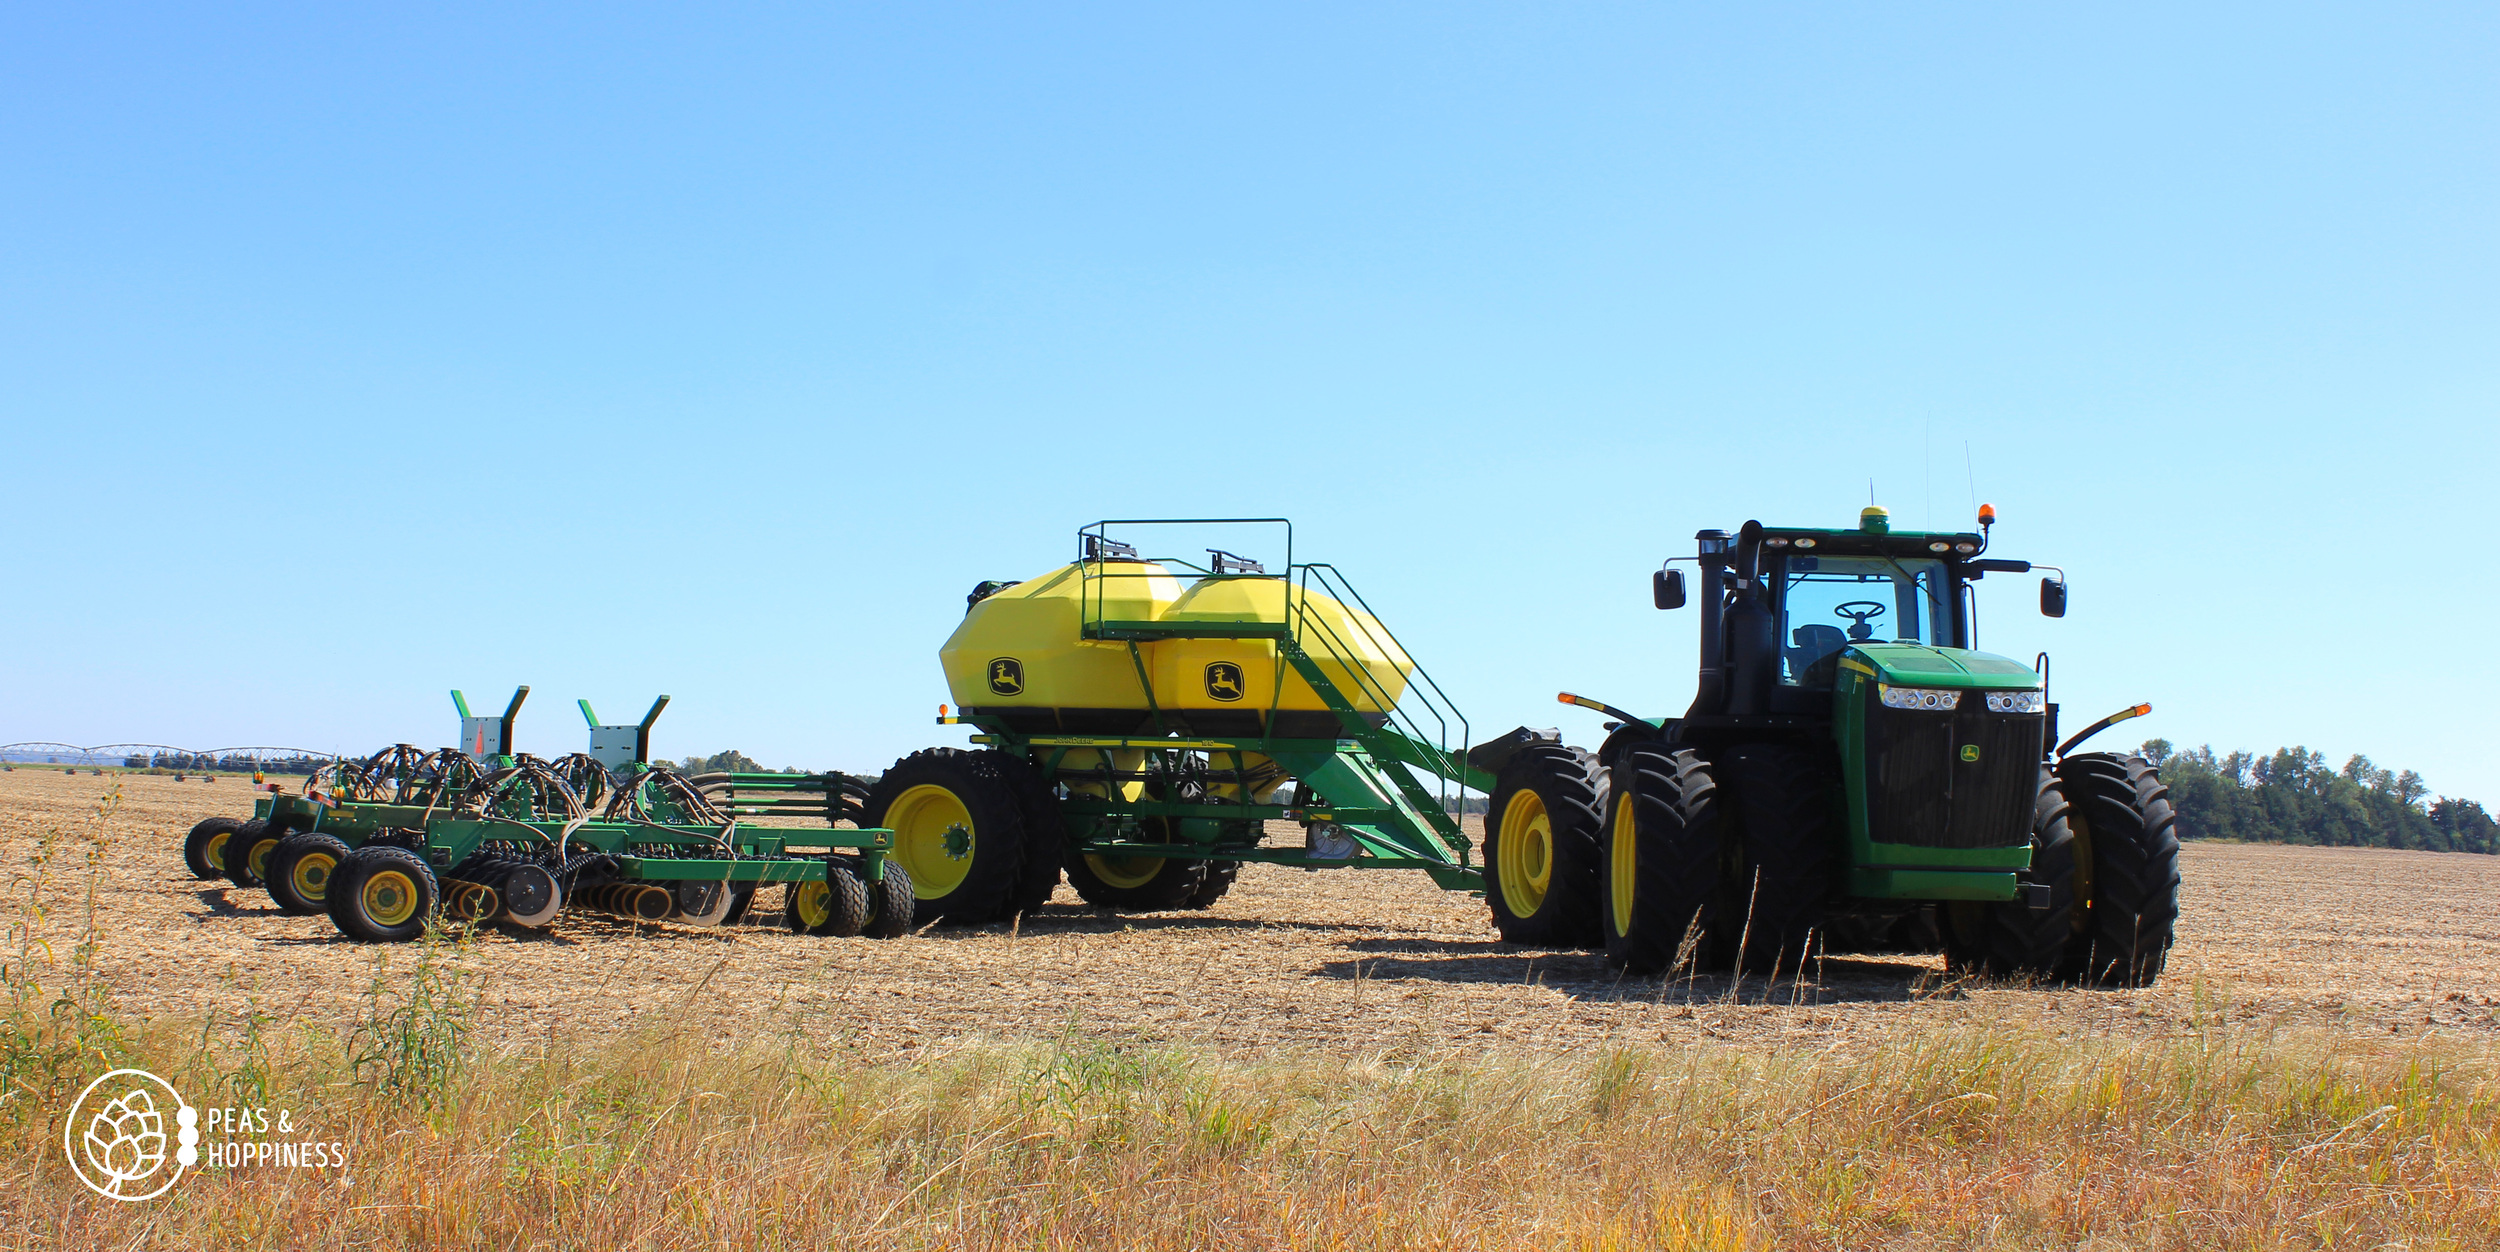 The air-seeder, used to drill wheat. The front hopper contains wheat seed; the rear hopper contain dry synthetic nitrogen